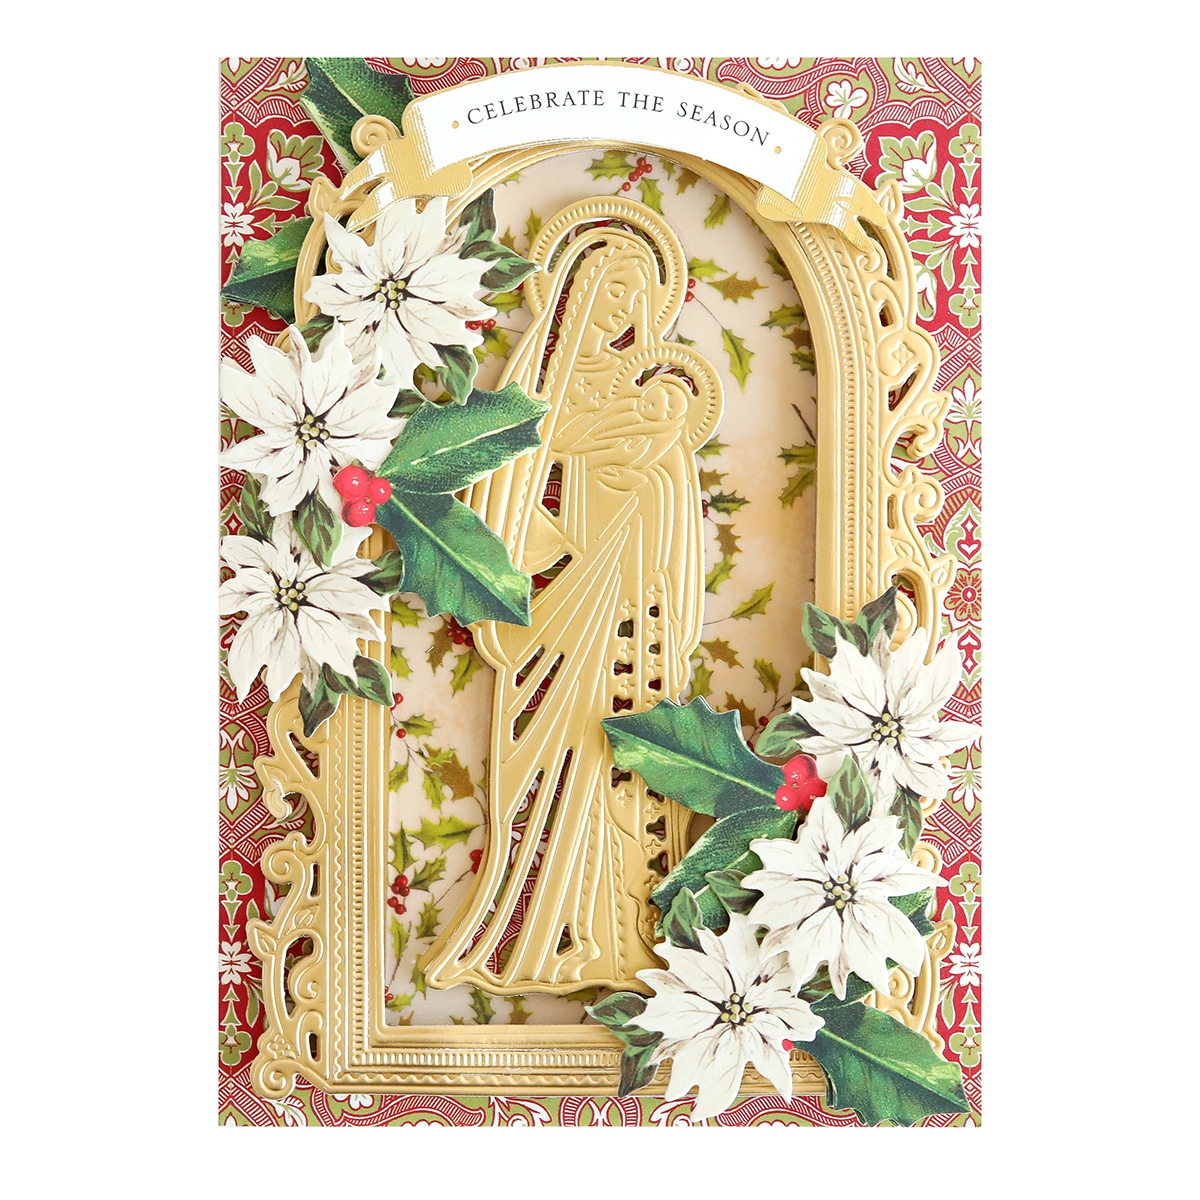 A card with the image of the virgin and holly.